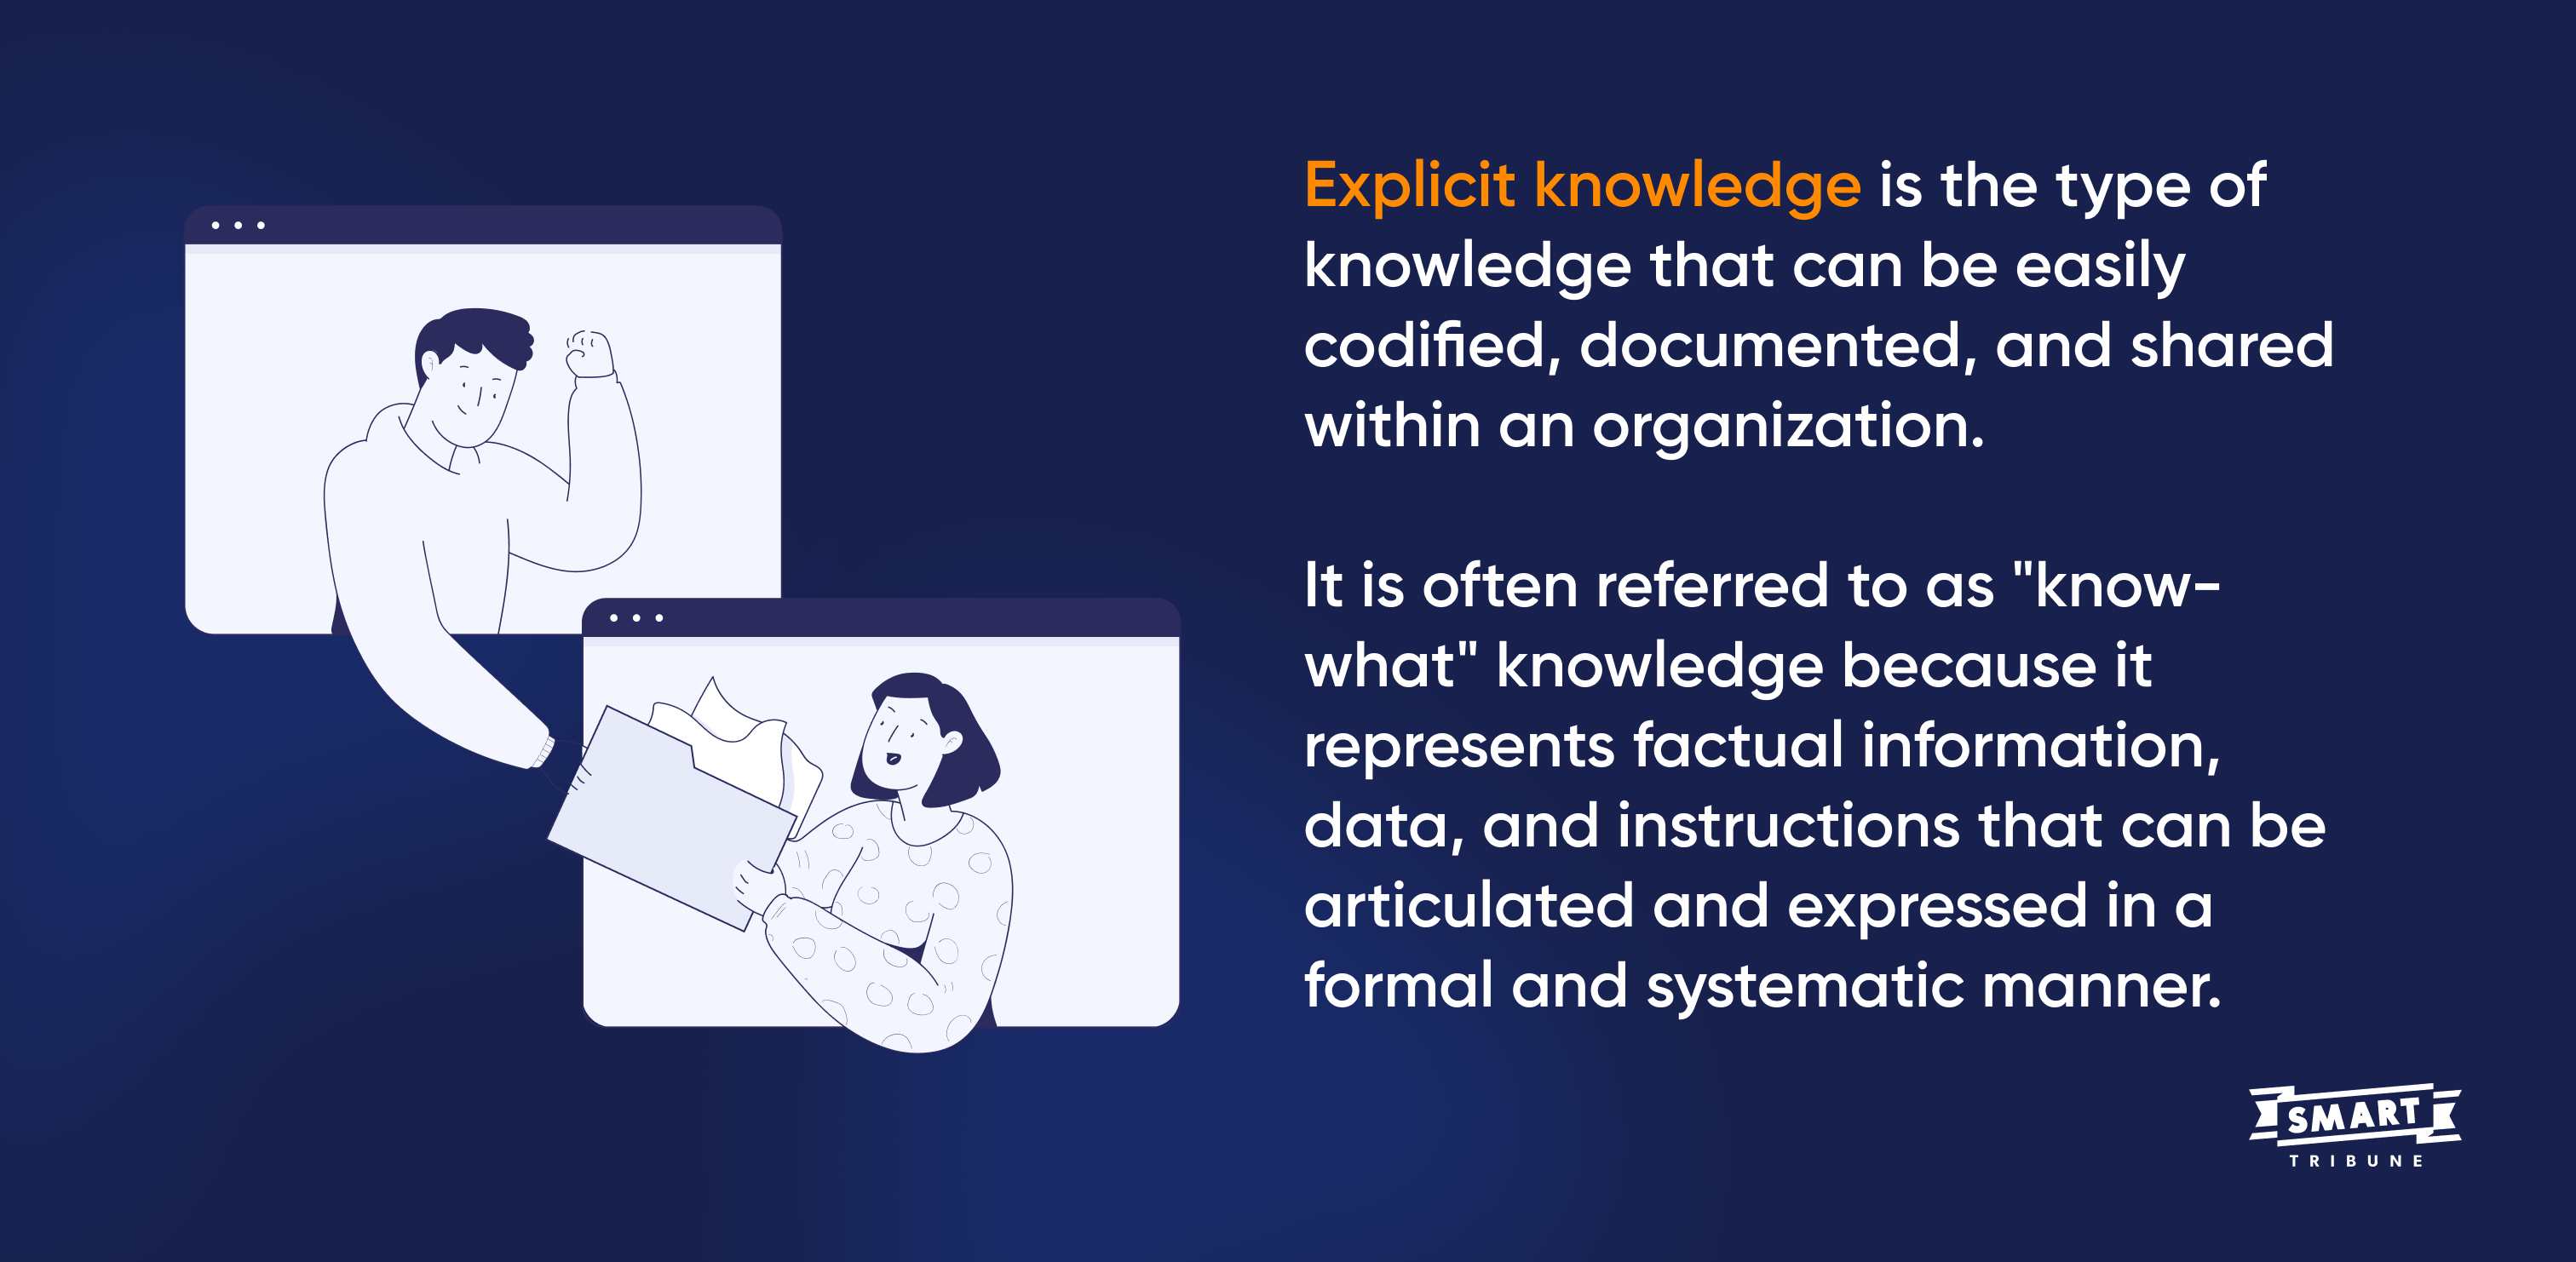 Definition of explicit knowledge